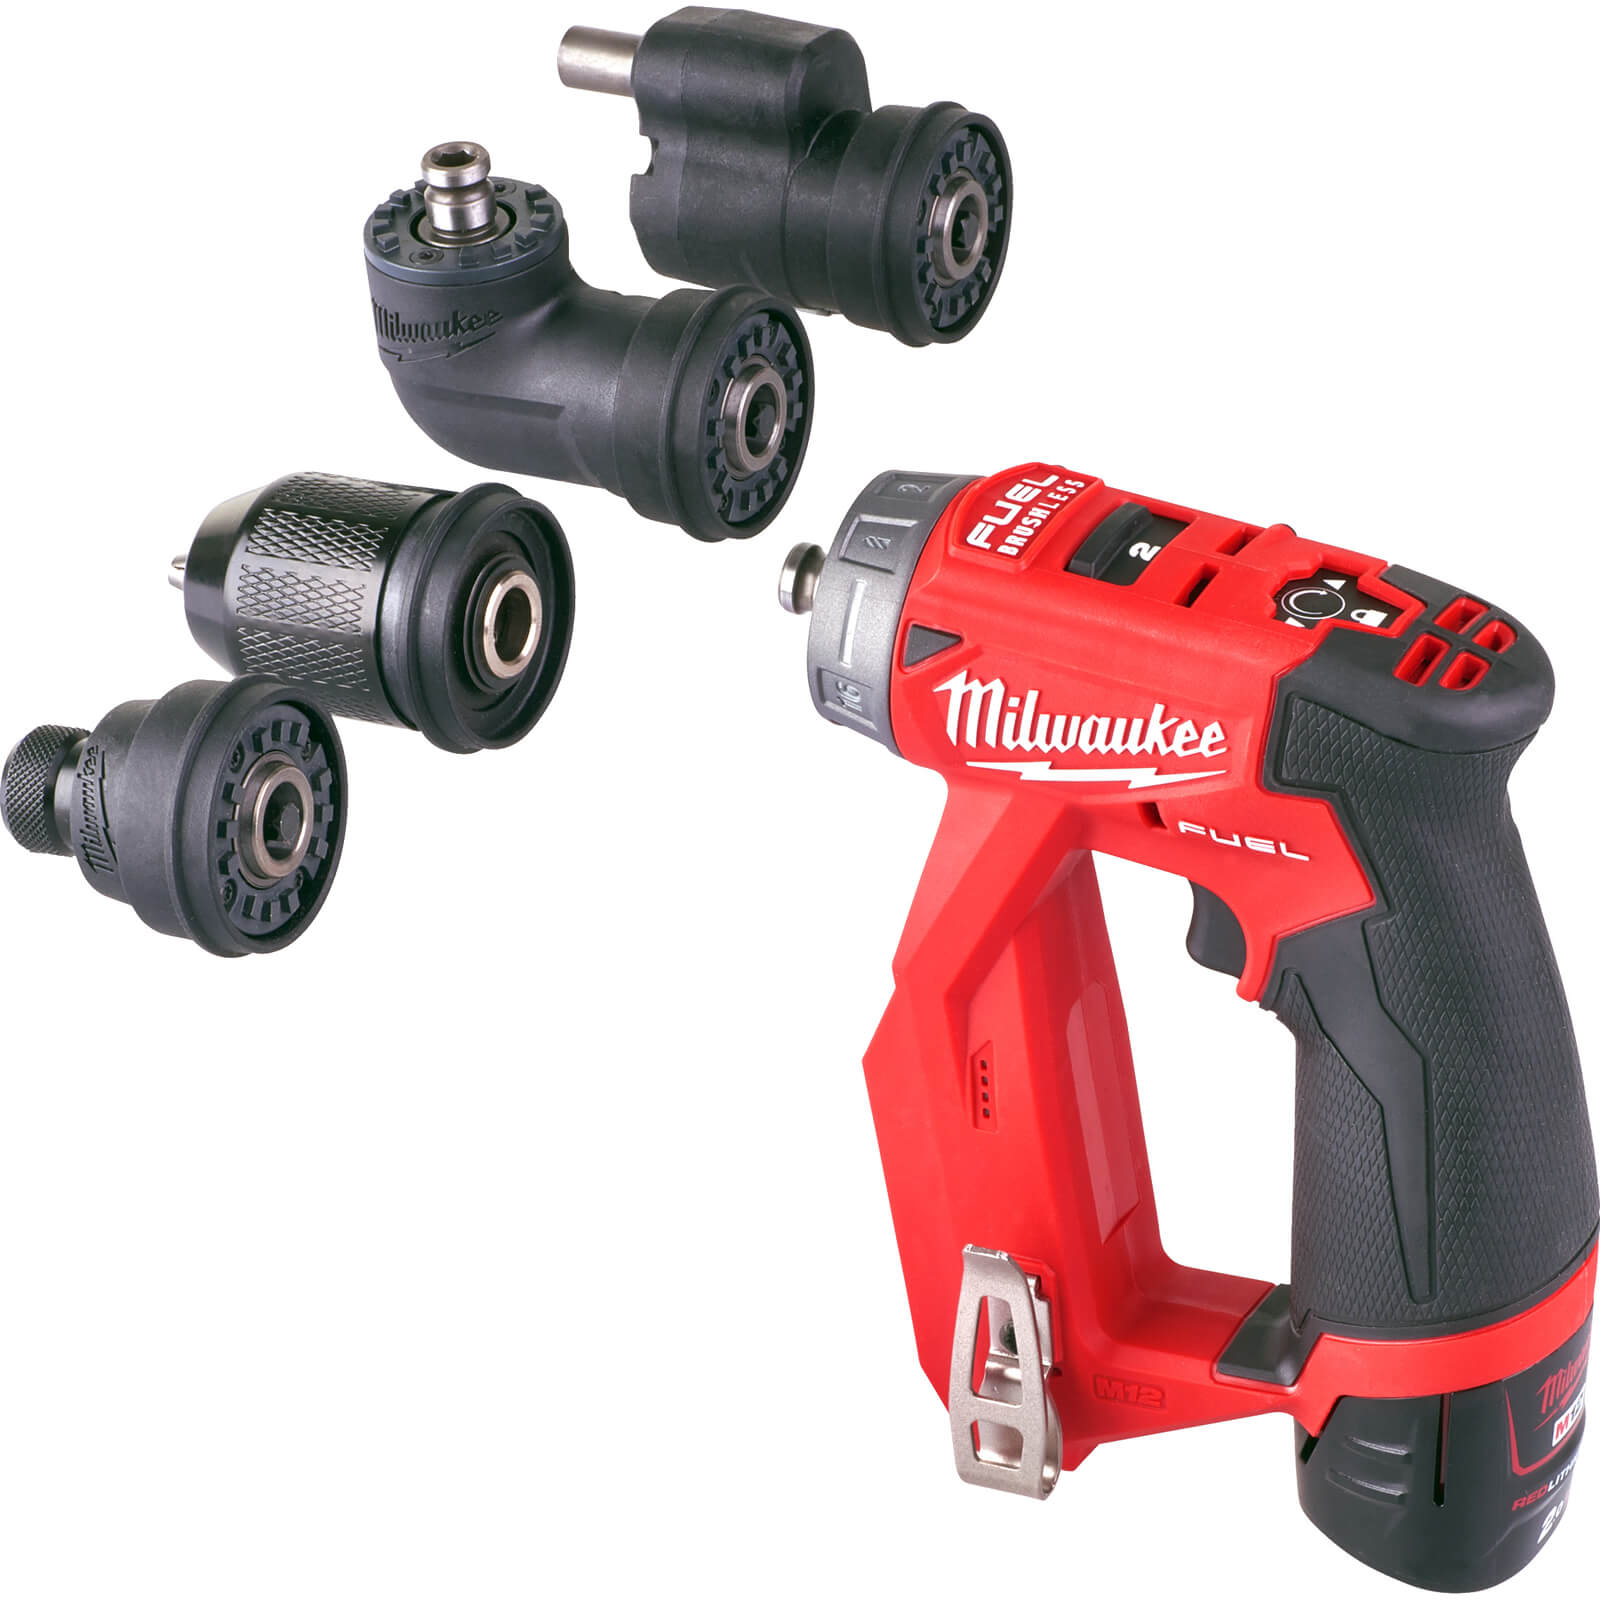 Image of Milwaukee M12 FDDXKIT Fuel 12v Cordless Brushless Installation Drill Driver 2 x 2ah Li-ion Charger Case